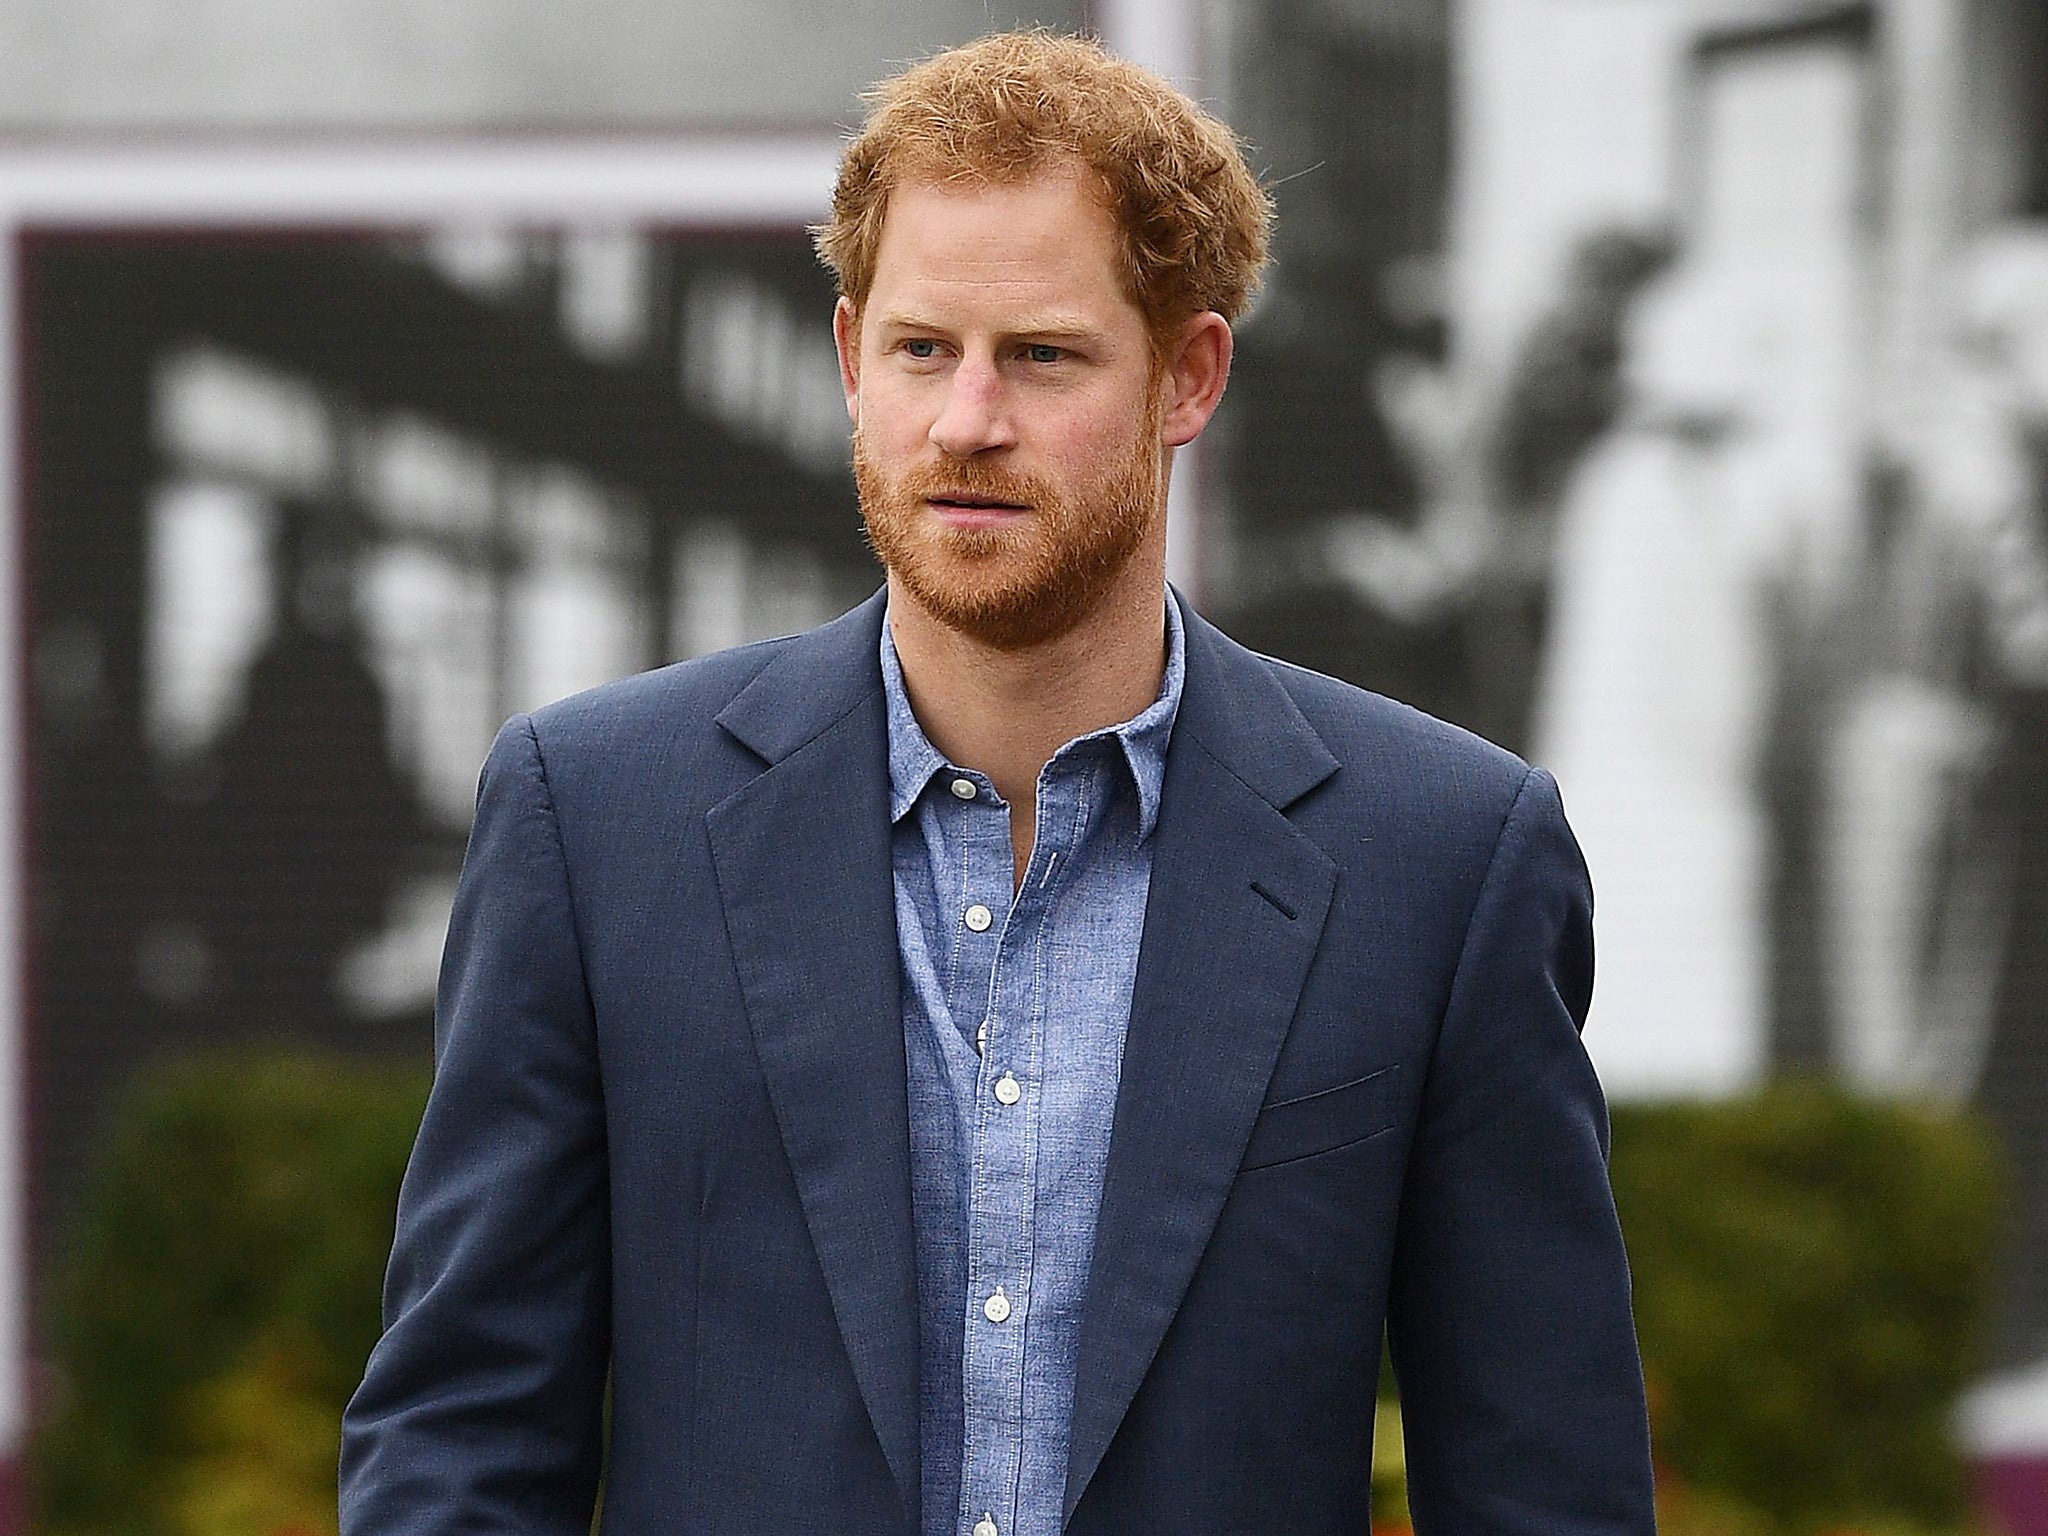 Unlike a traditional Royal, Harry is following the current trend for publicly sharing his emotions